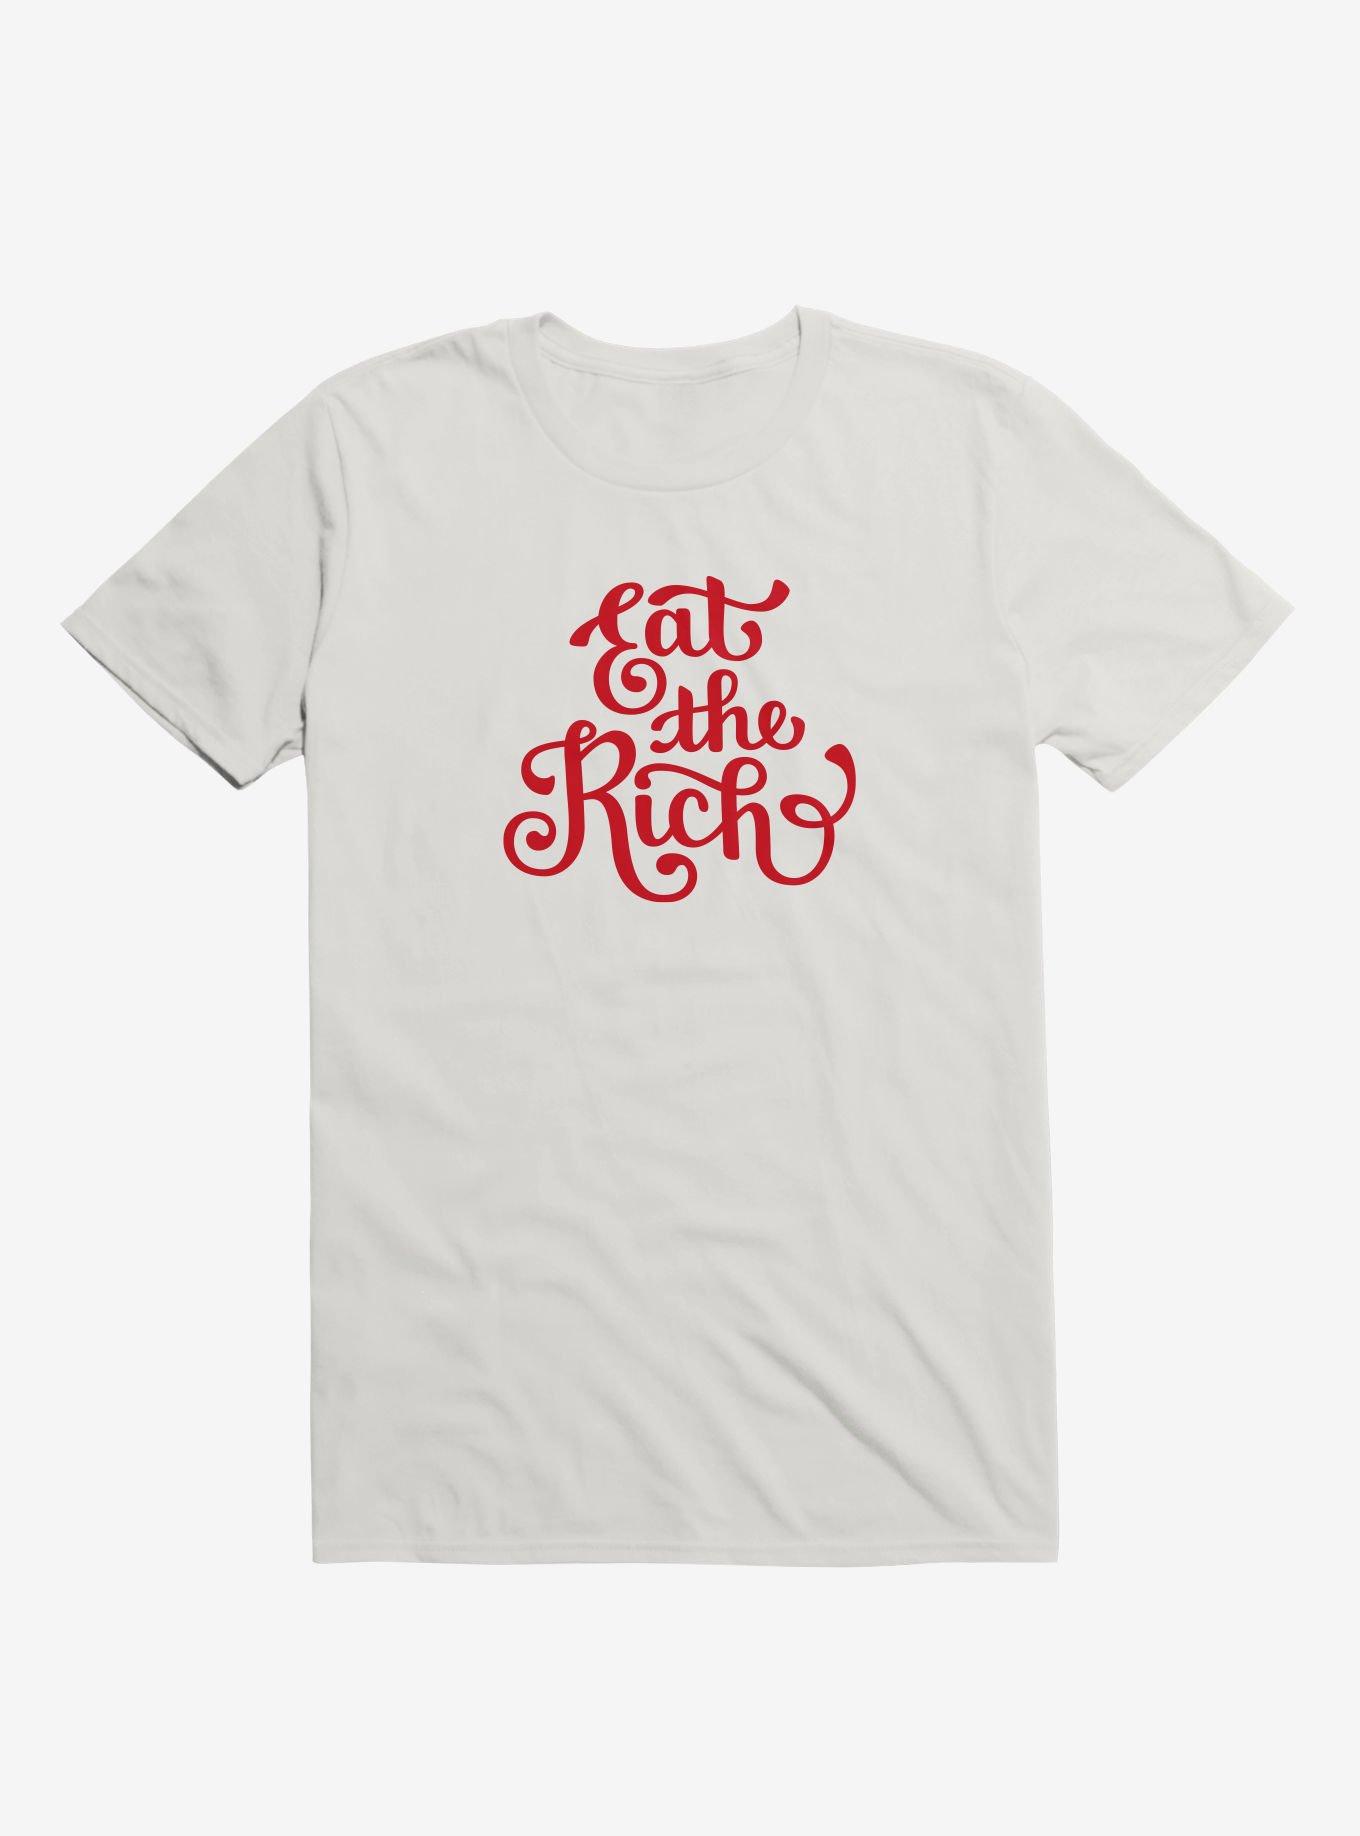 Eat the Rich T-Shirt - WHITE | Hot Topic